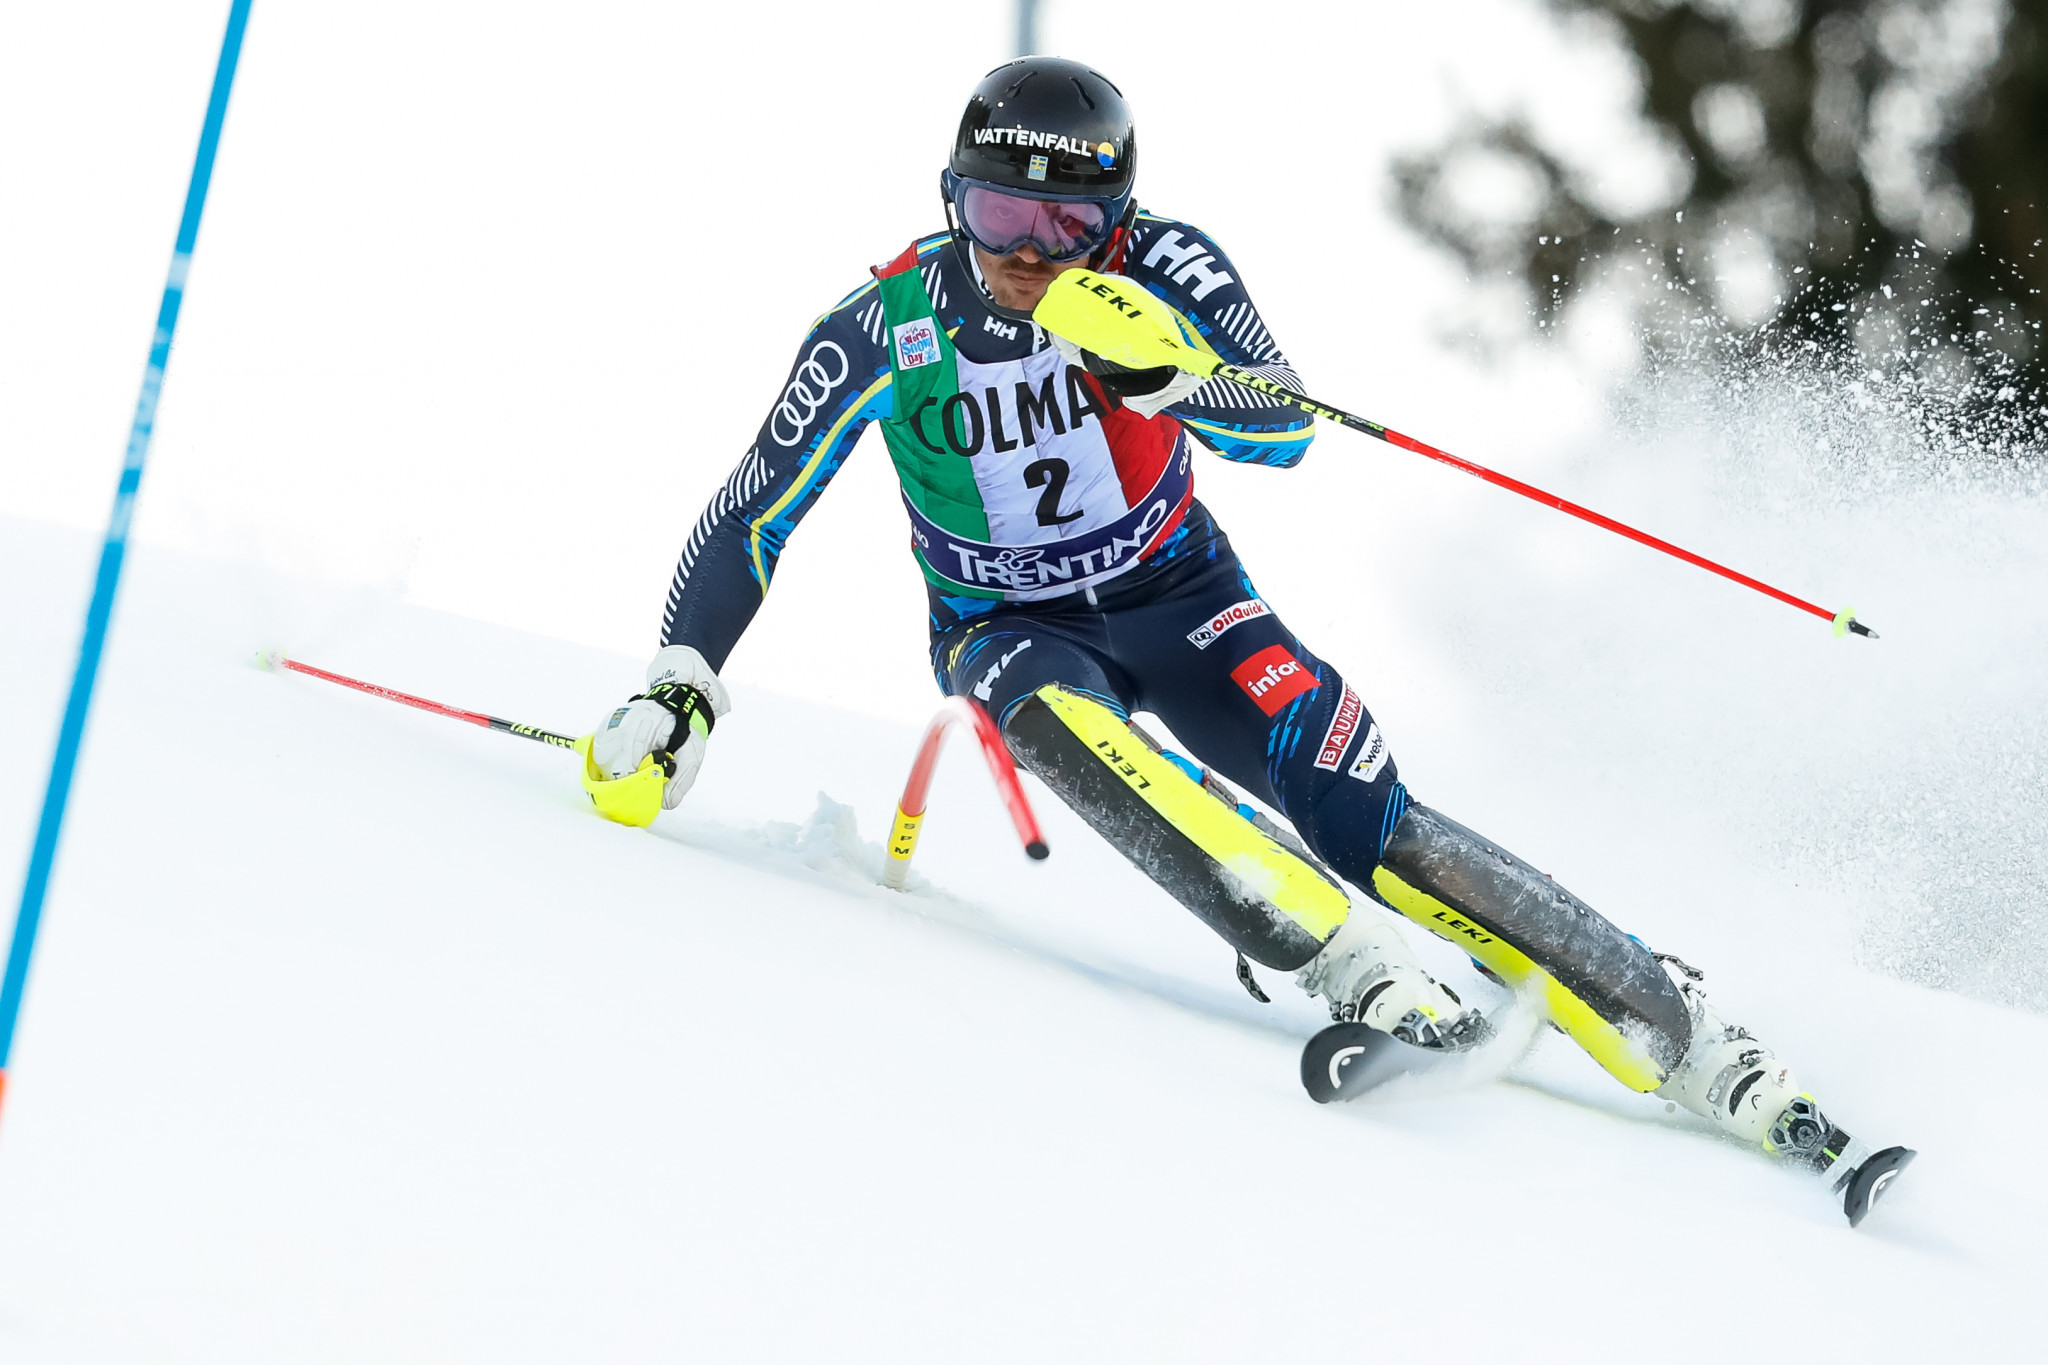 Olympic champion André Myhrer of Sweden will be defending his title at the FIS Alpine Ski World Cup event in Oslo ©Getty Images